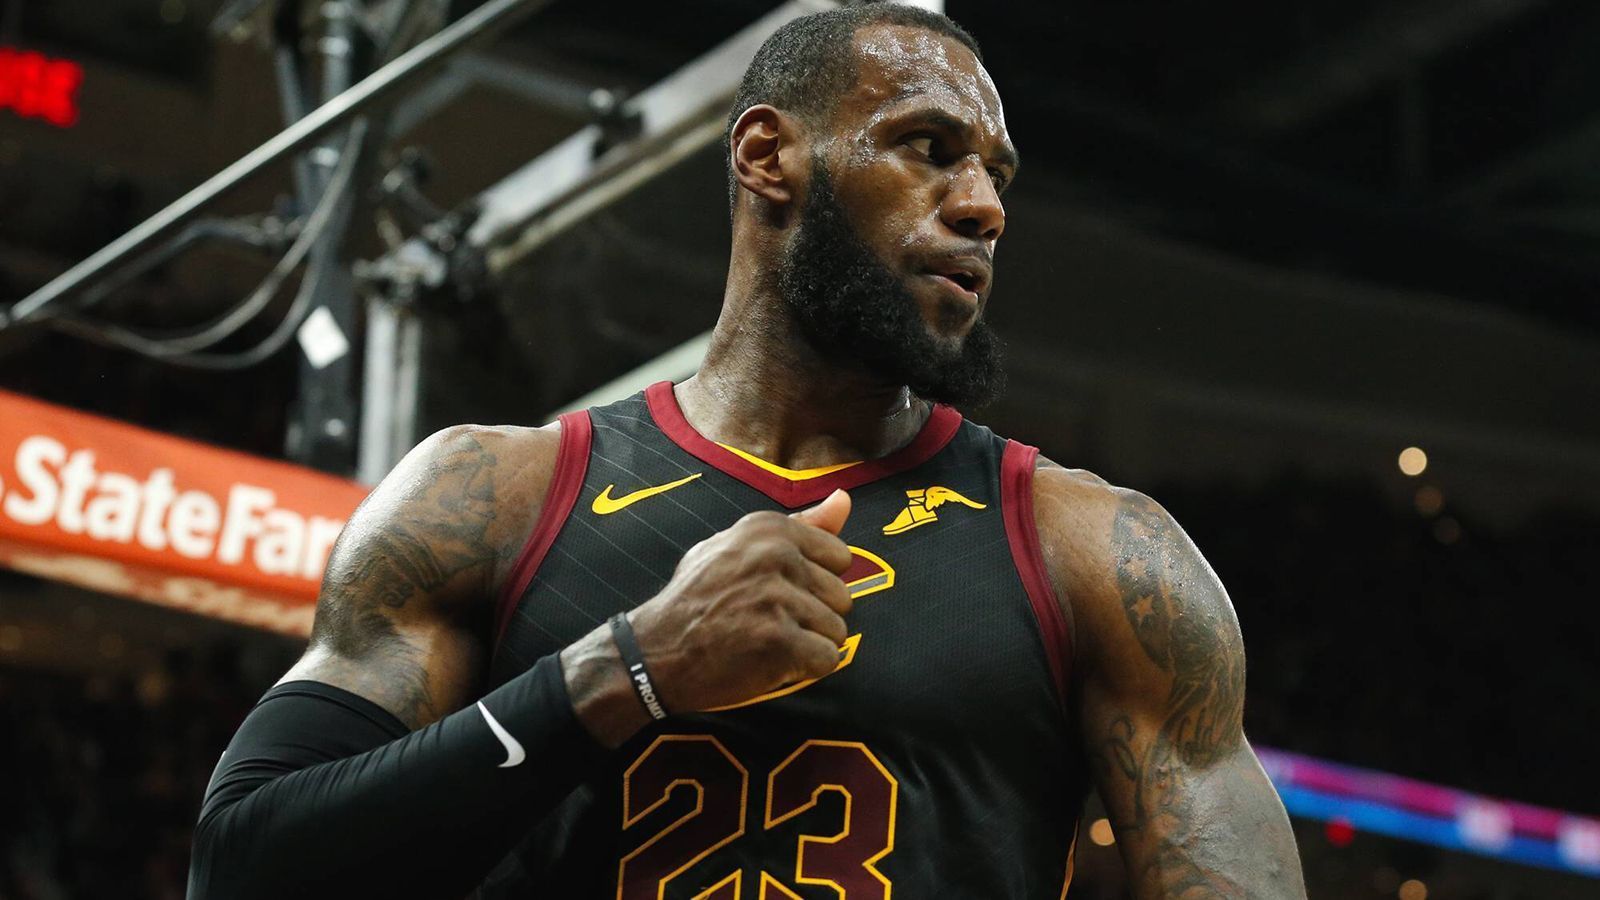 
                <strong>LeBron James (Cleveland Cavaliers)</strong><br>
                LeBron James (Cleveland Cavaliers): Player of the Year Fan Award
              